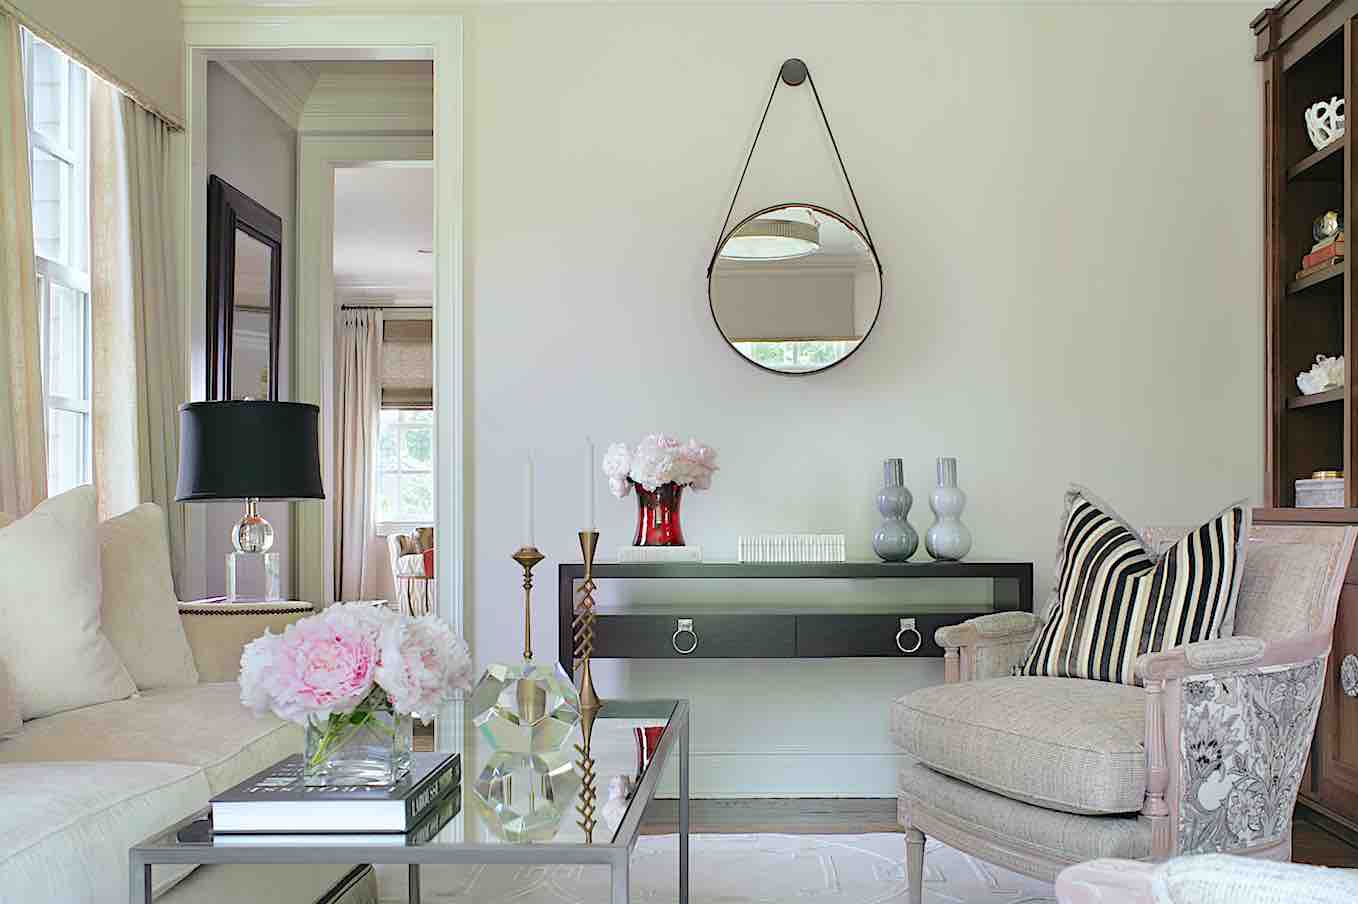 How to Use Mirrors in Living Room Decor